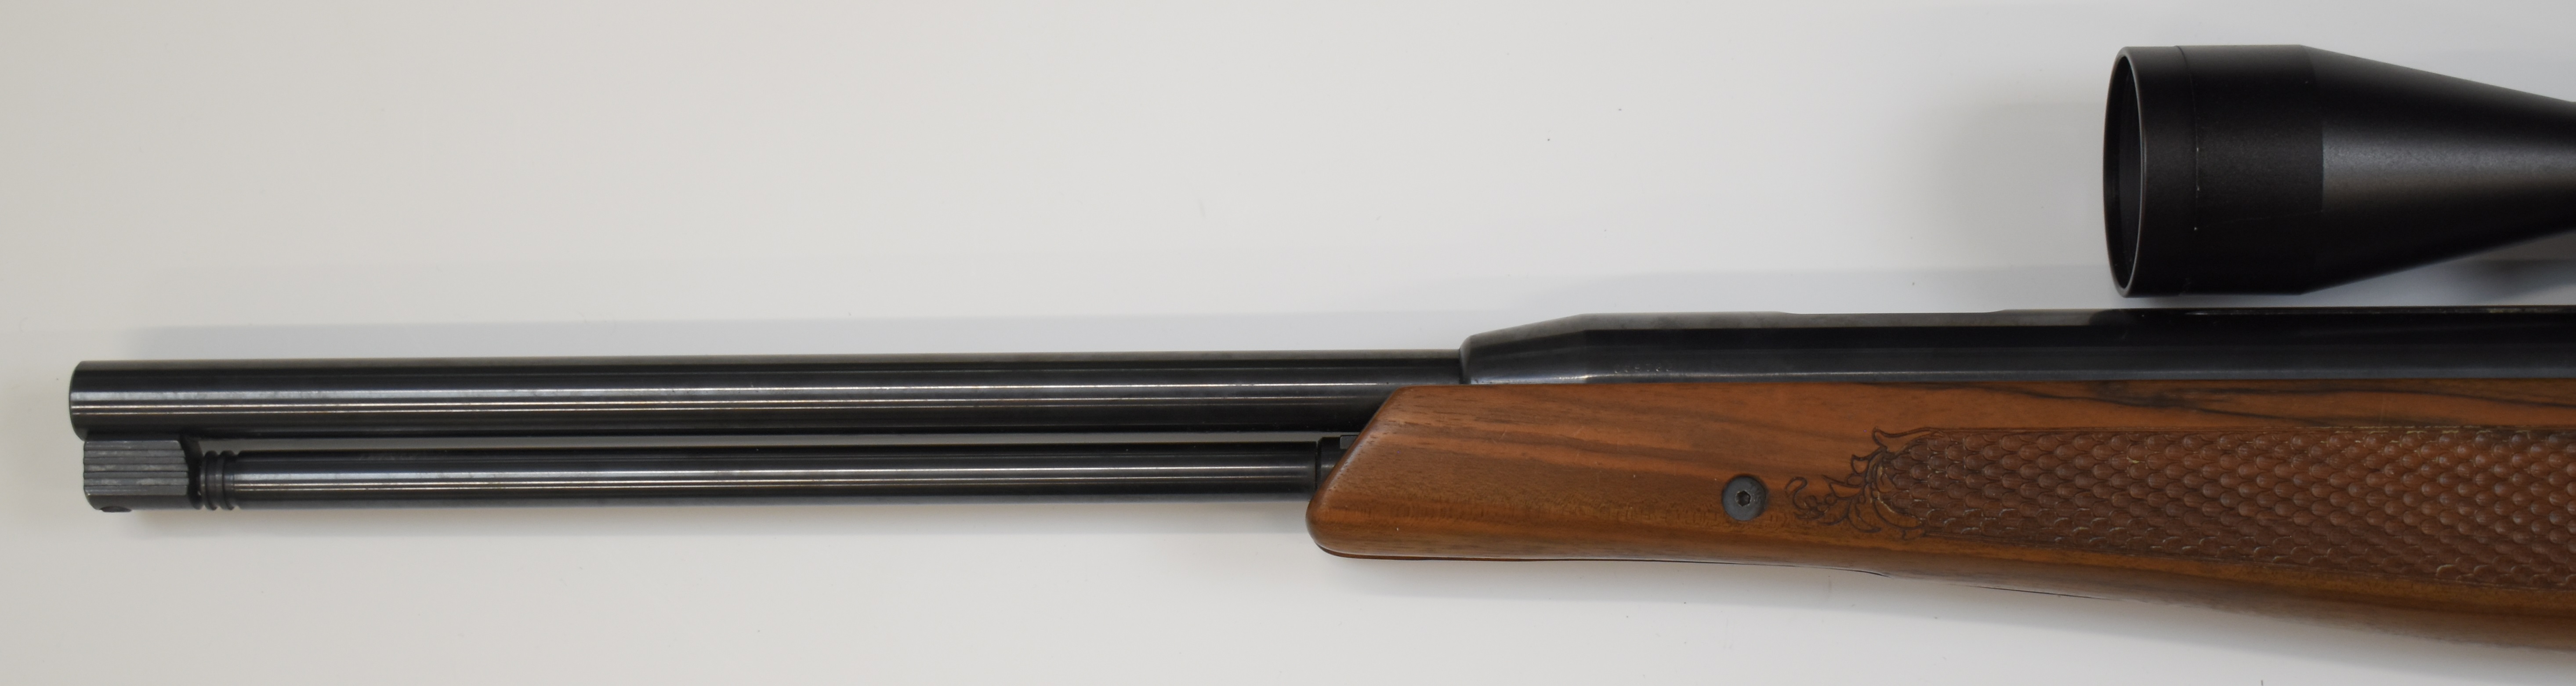 Air Arms TX200 .22 under-lever air rifle with carved semi-pistol grip and forend, adjustable - Image 9 of 9